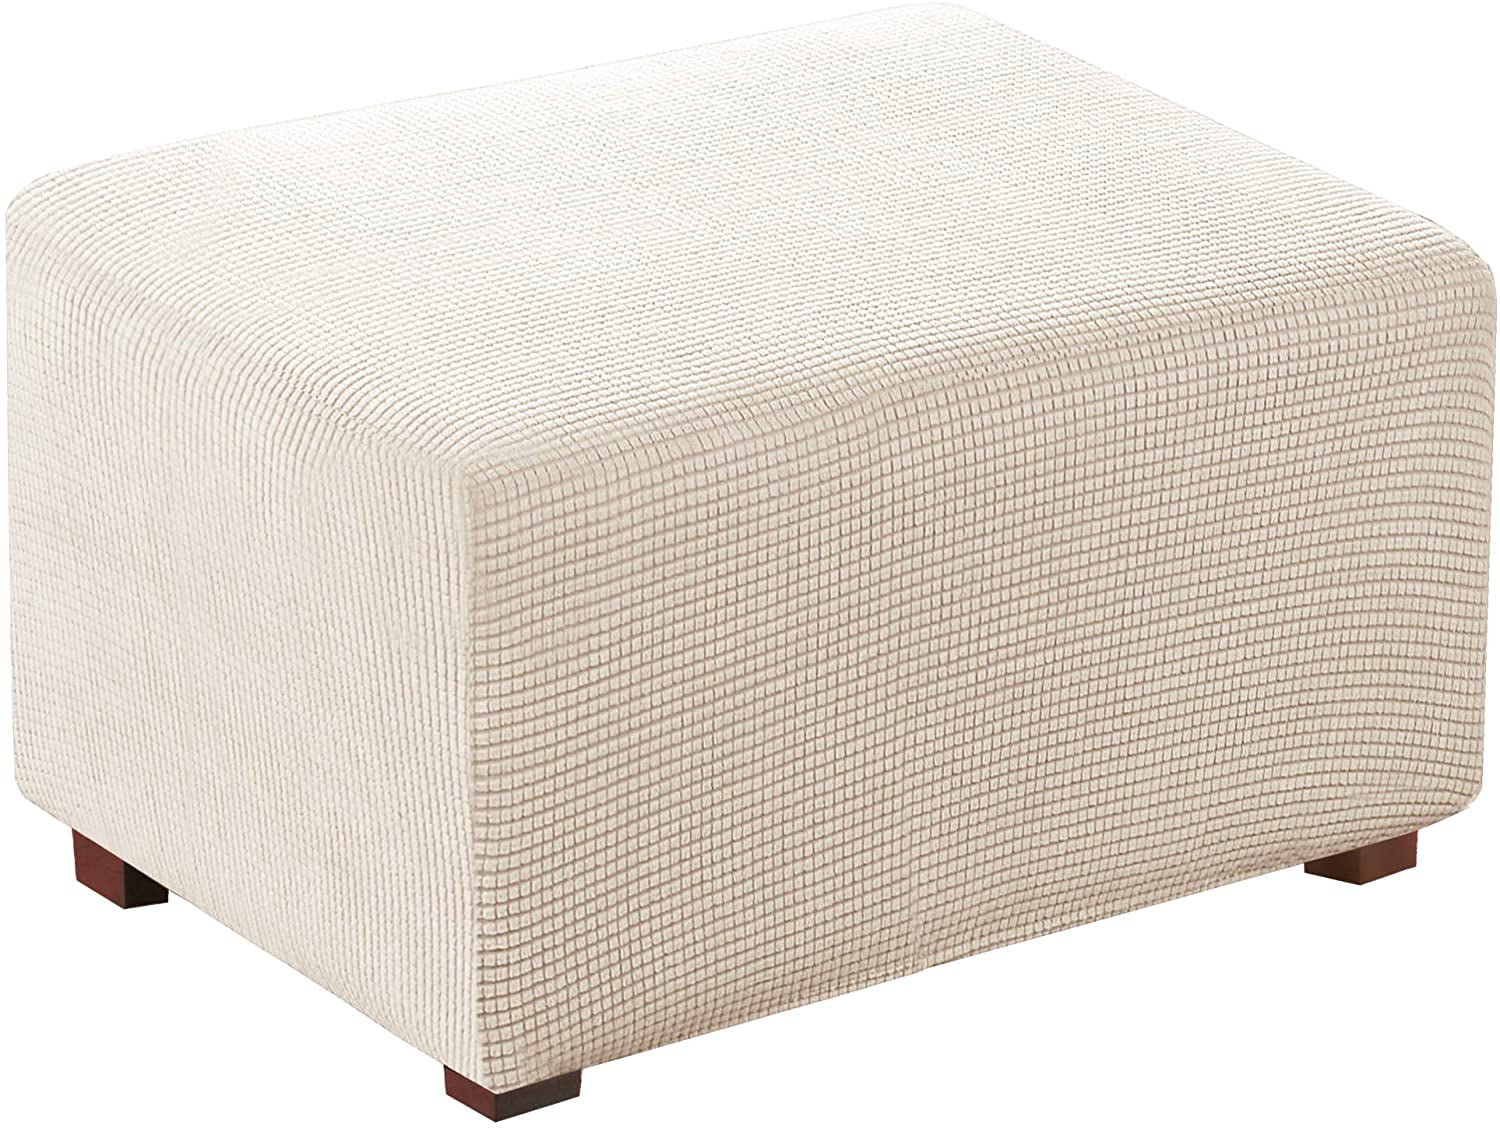 Details about   Footstool Cover Stretch Stool Ottoman Sofa Storage Slipcover Protector Elastic 